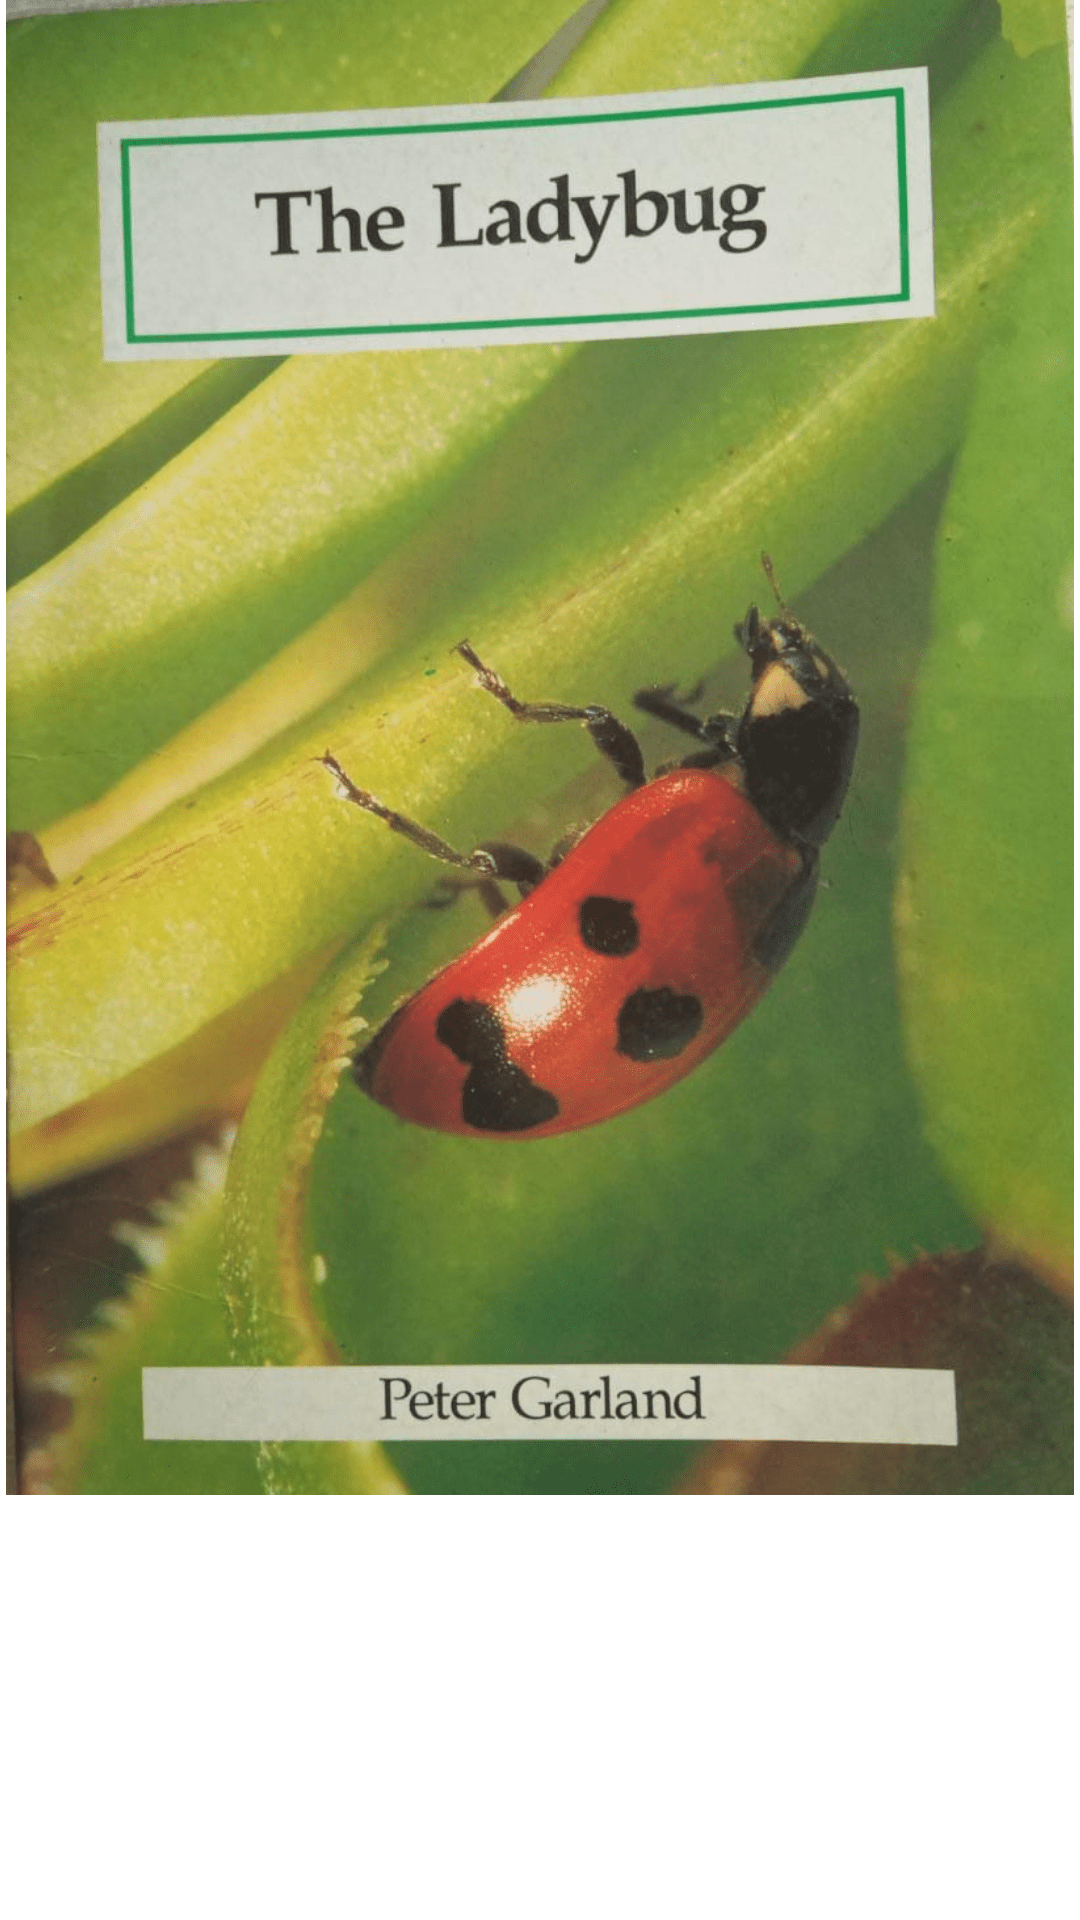 The Ladybug by Peter Garland